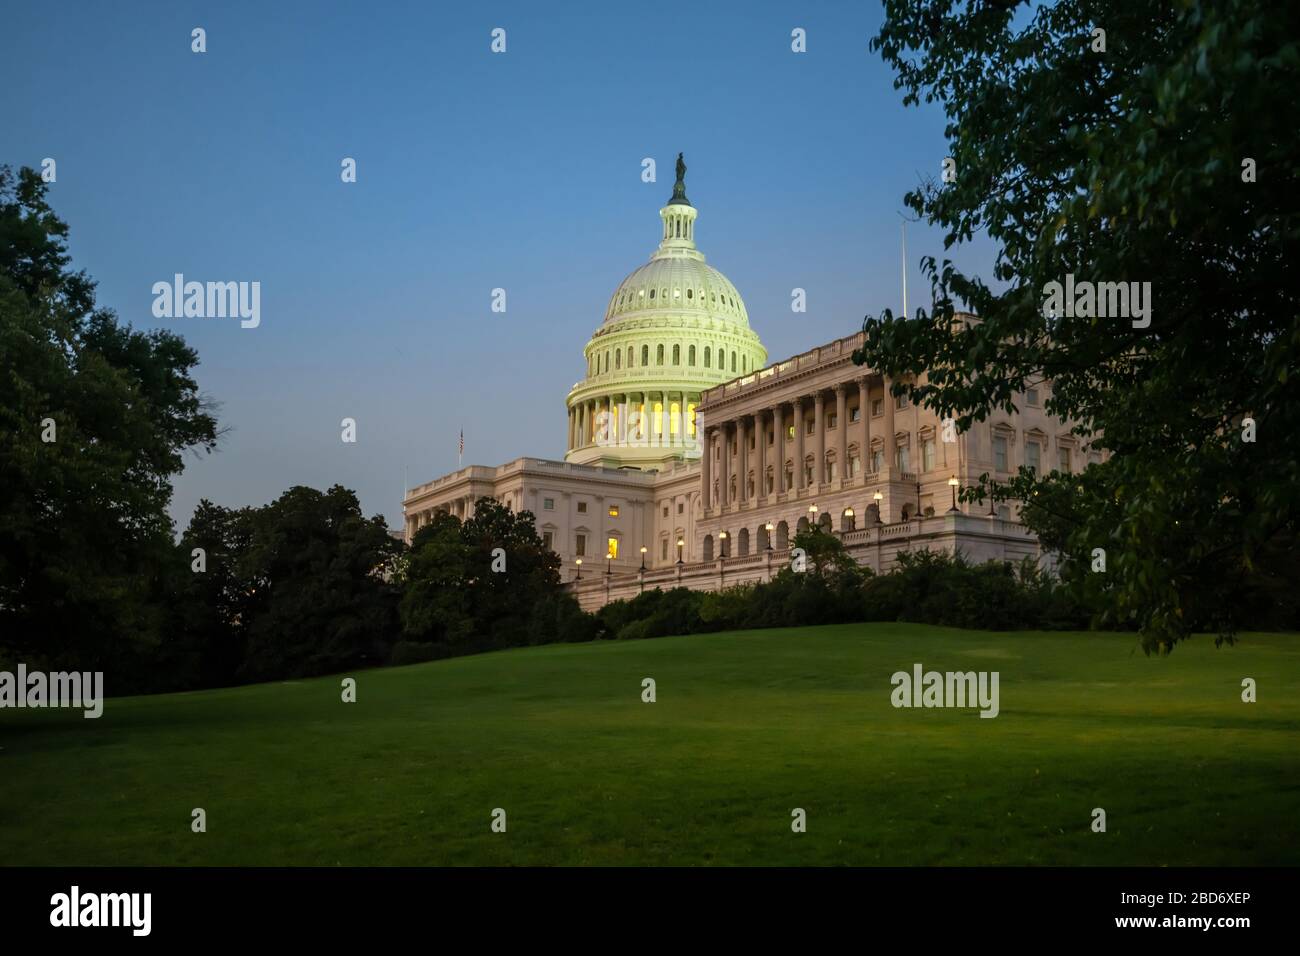 The United States Capitol building in Washington DC, United States of America Stock Photo